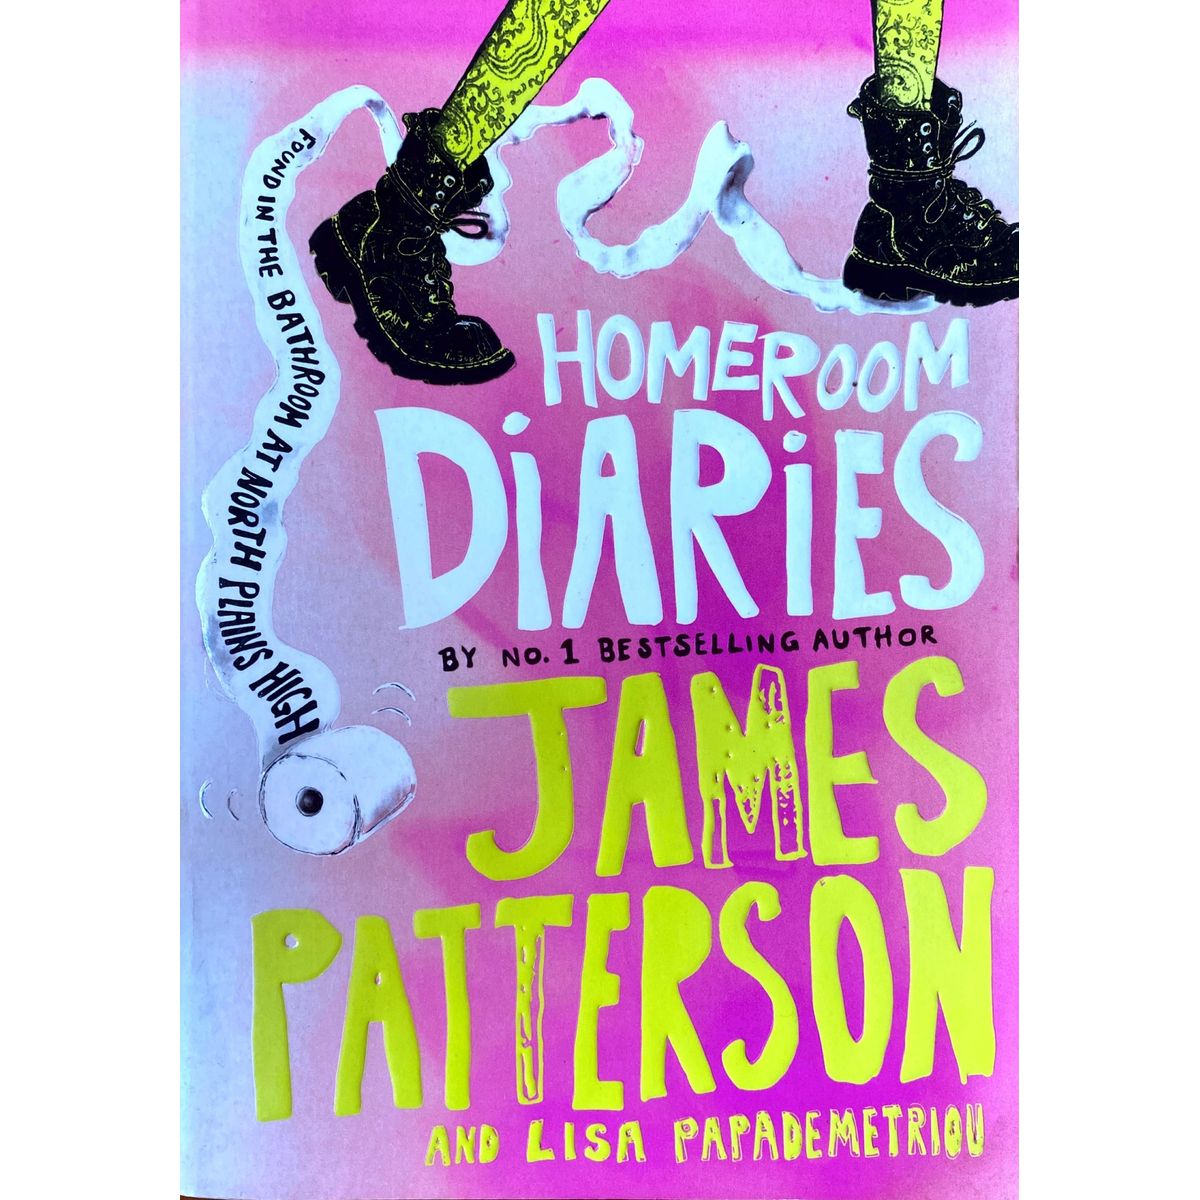 ISBN: 9780099596264 / 0099596261 - Homeroom Diaries by James Patterson and Lisa Papademetriou, illustrated by Keino [2014]